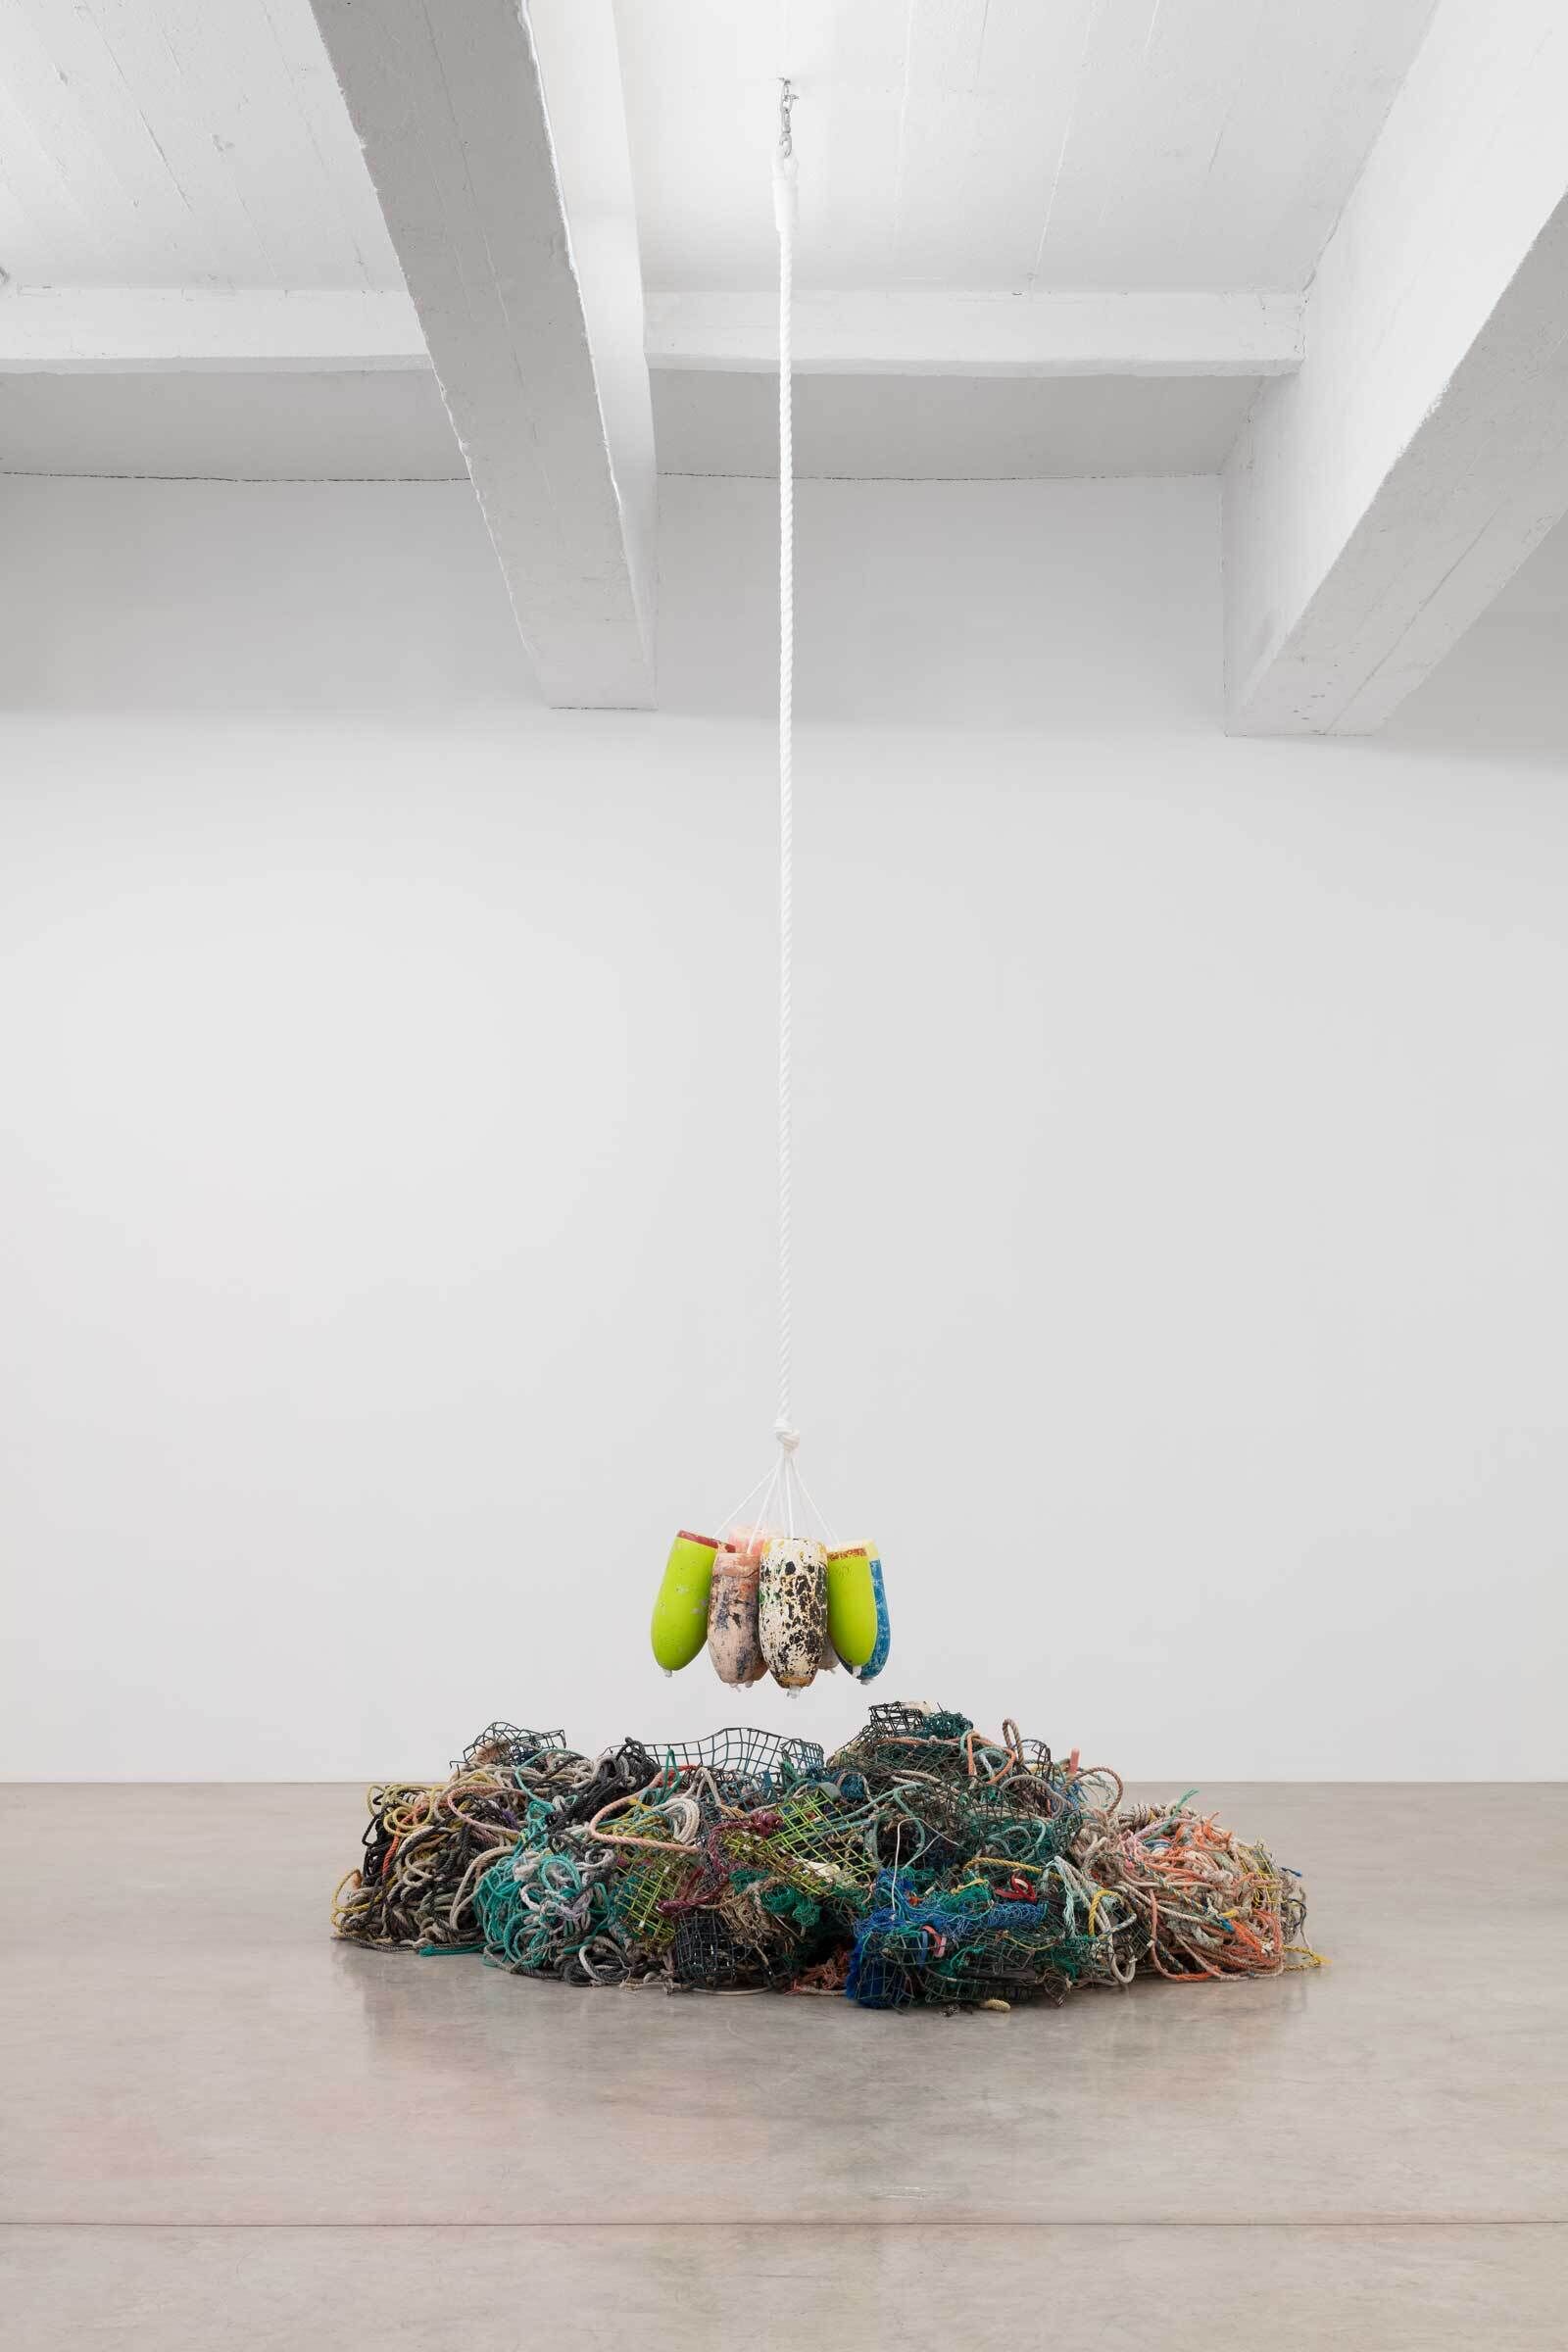 Colorful buoys hanging from a rope above a pile of tangled fishing nets on a gallery floor.